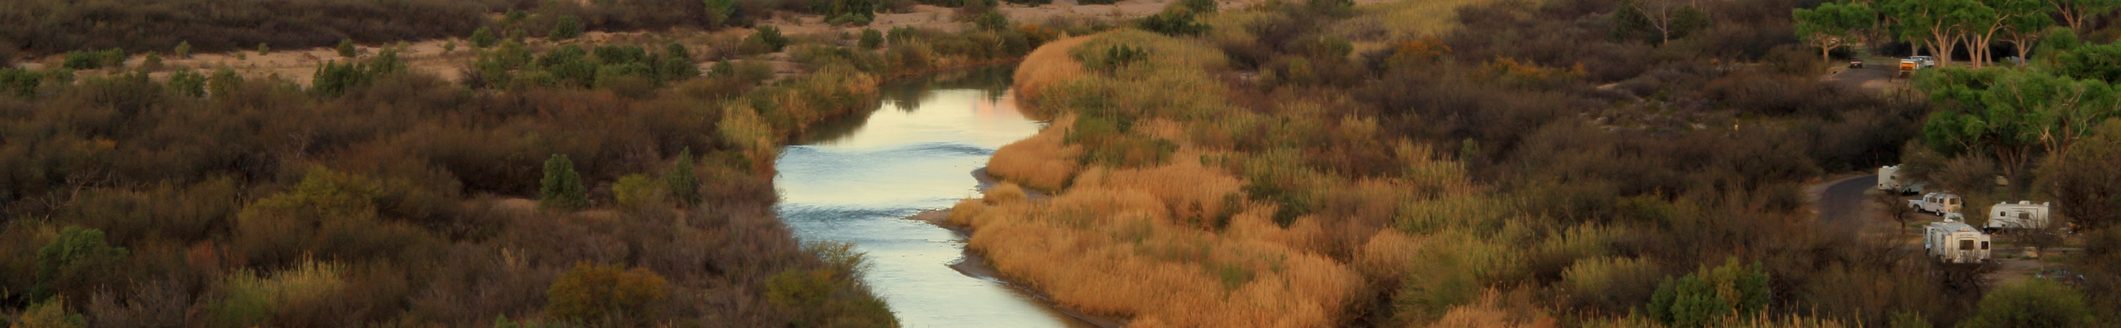 The Rio Grande as viewed from the Rio Grande Village Nature Trail in Big Bend National Park, Texas. (Photo: iStock - Wilsilver77)